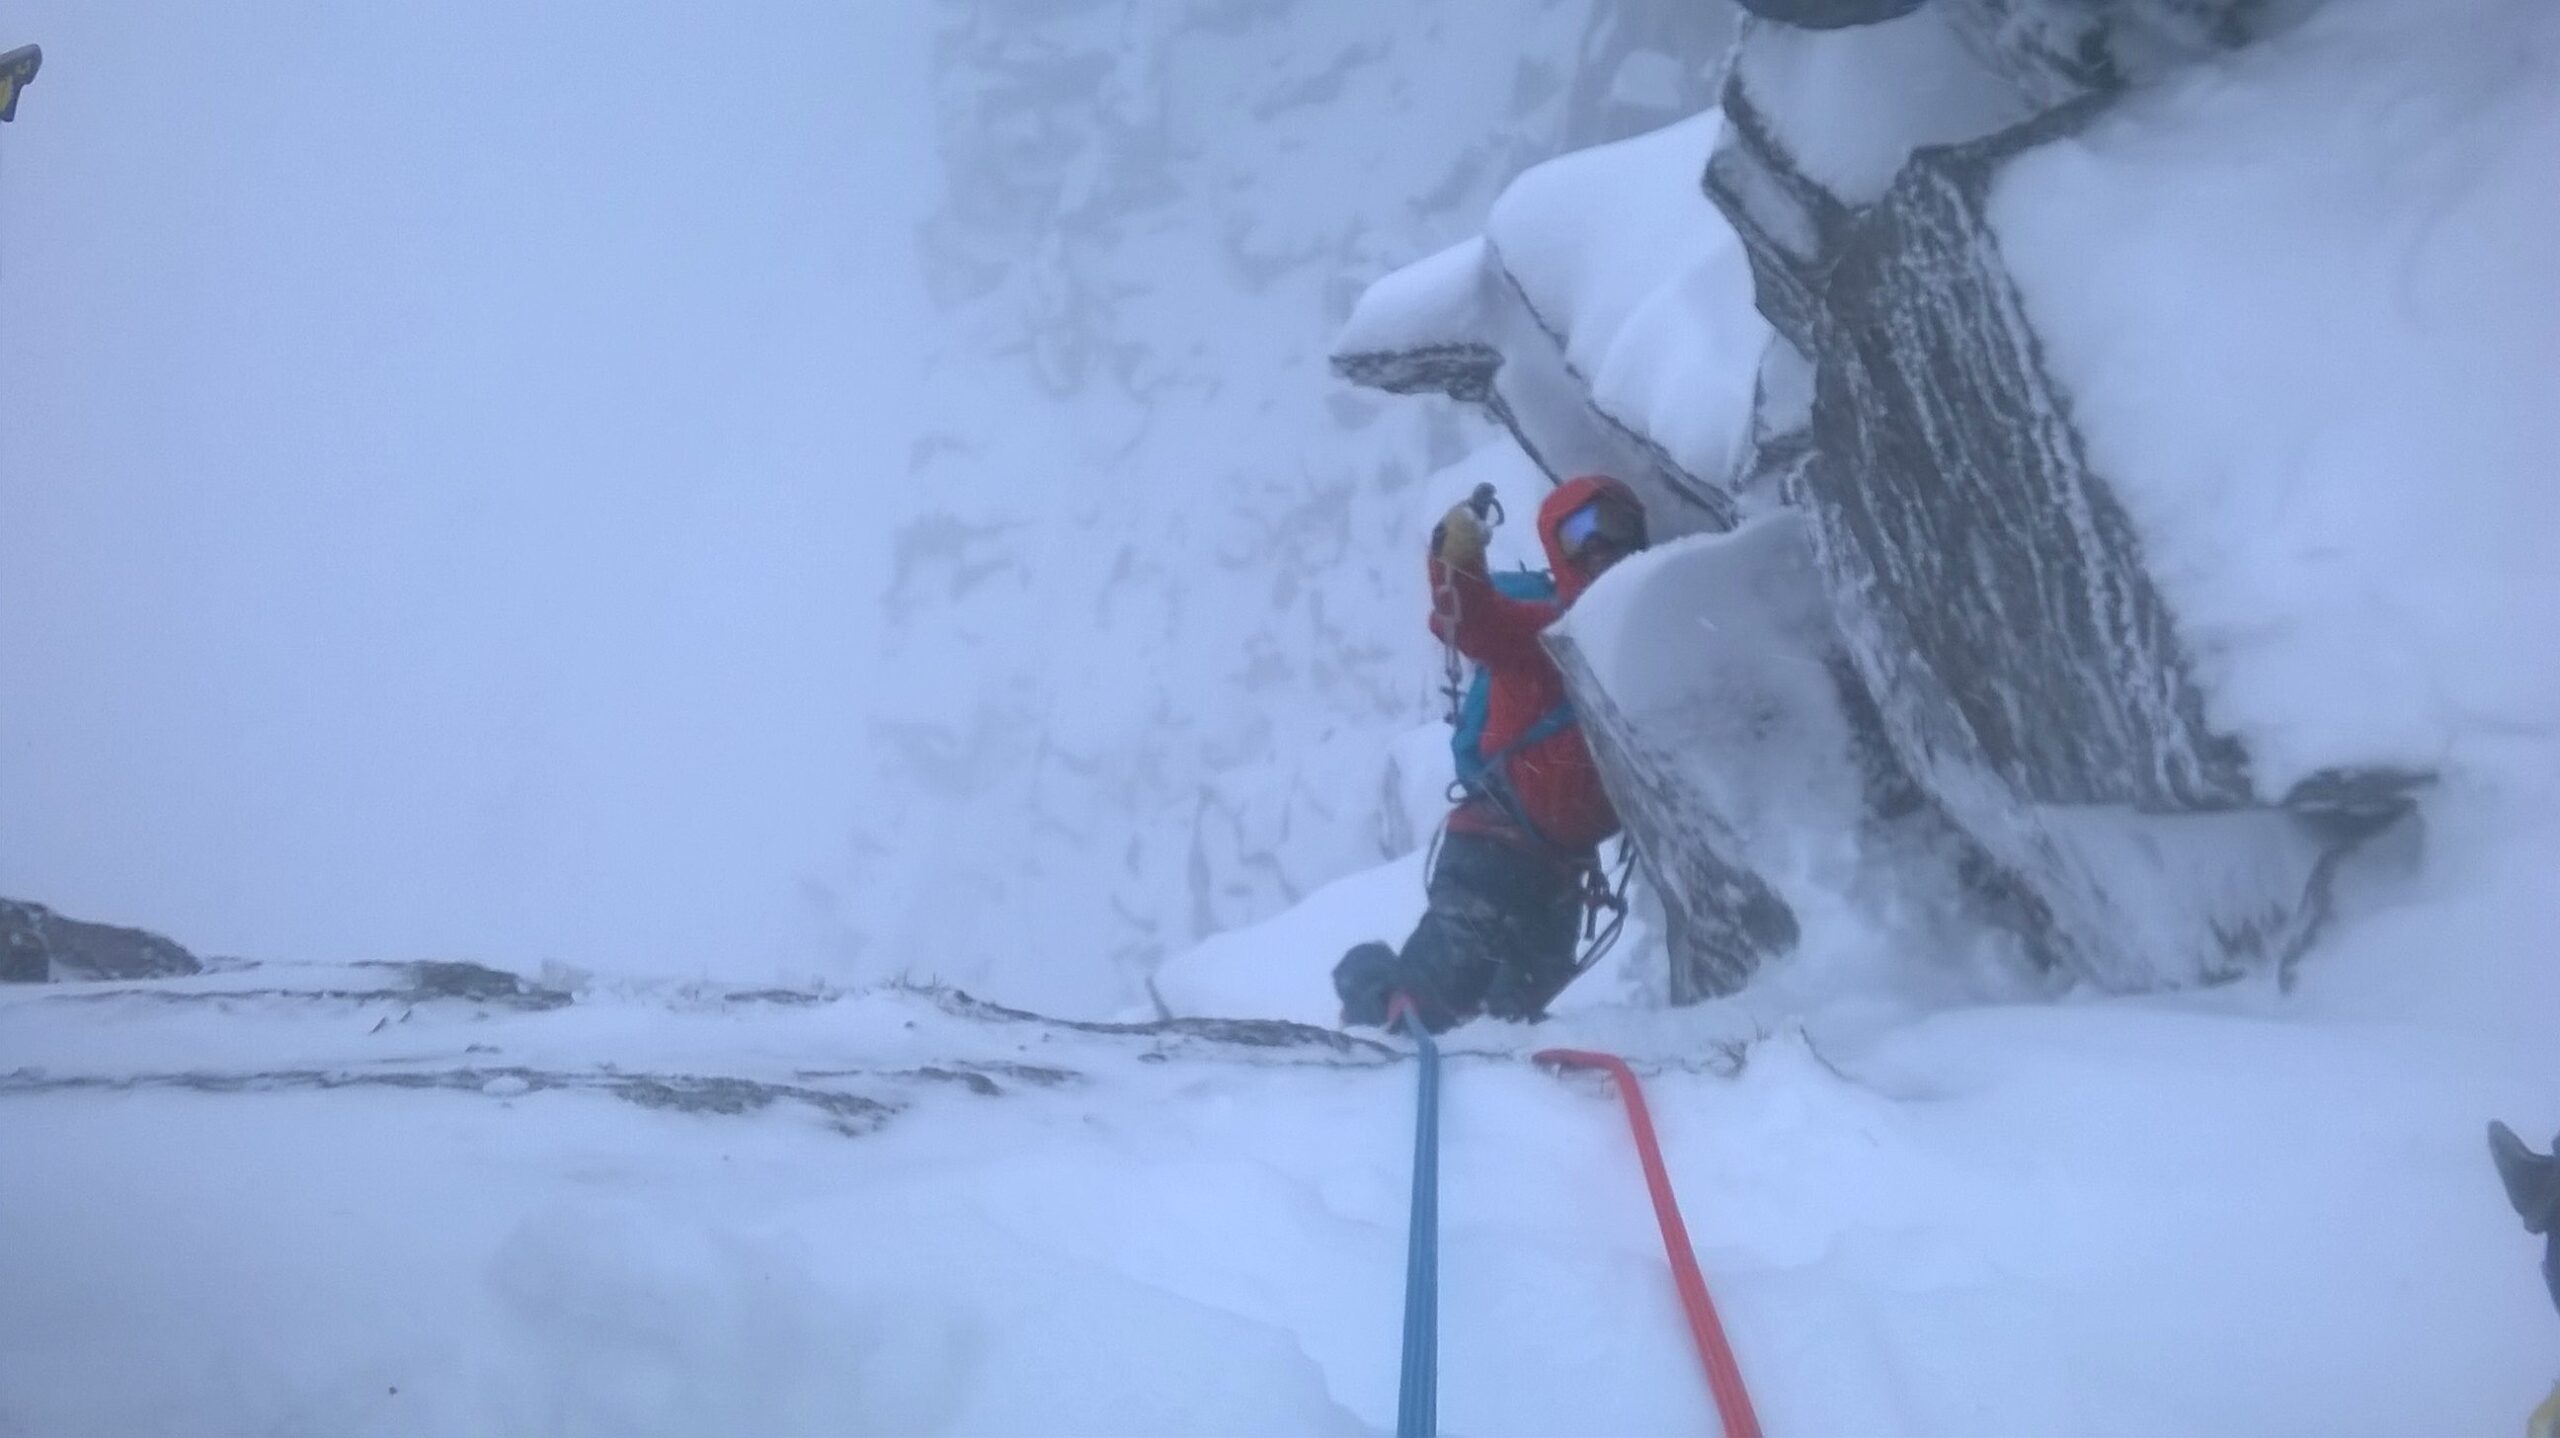 Tim climbing up a mountain in a blizzard